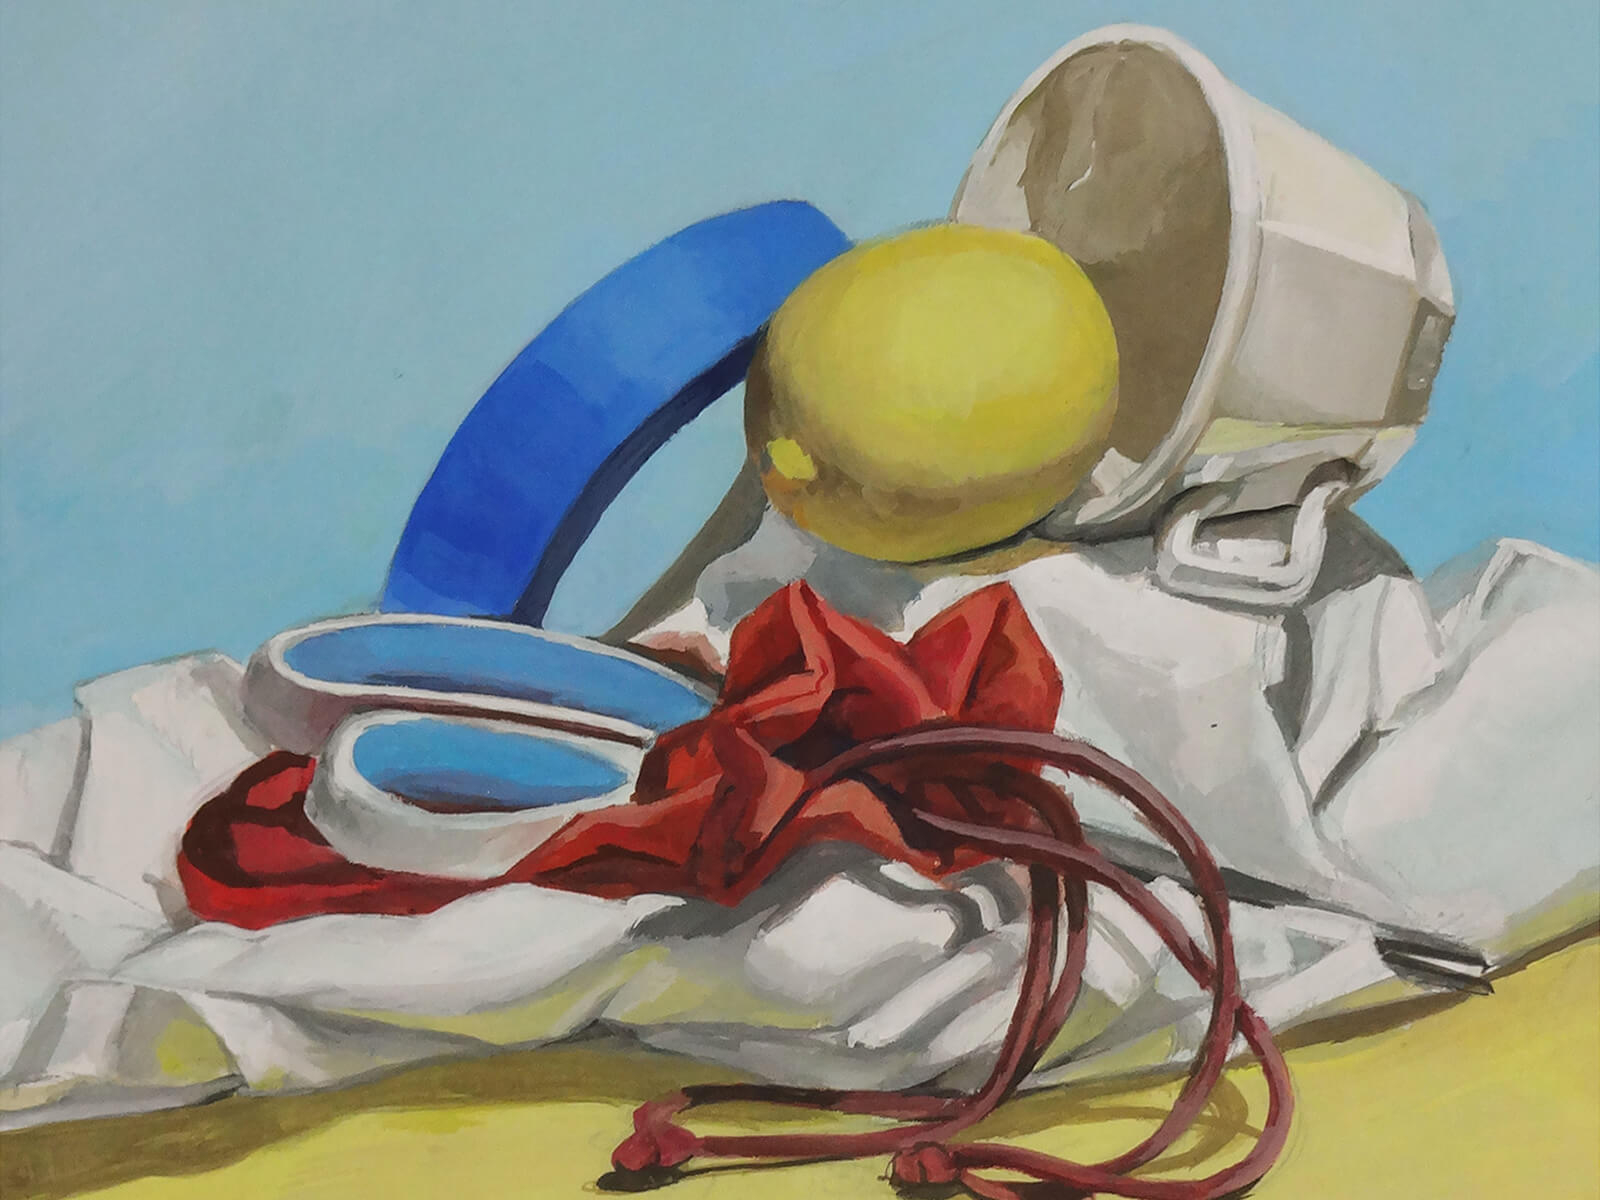 still-life traditional painting of a tea cup, a lemon, scissors, and a roll of blue painter's tape on a white draped sheet